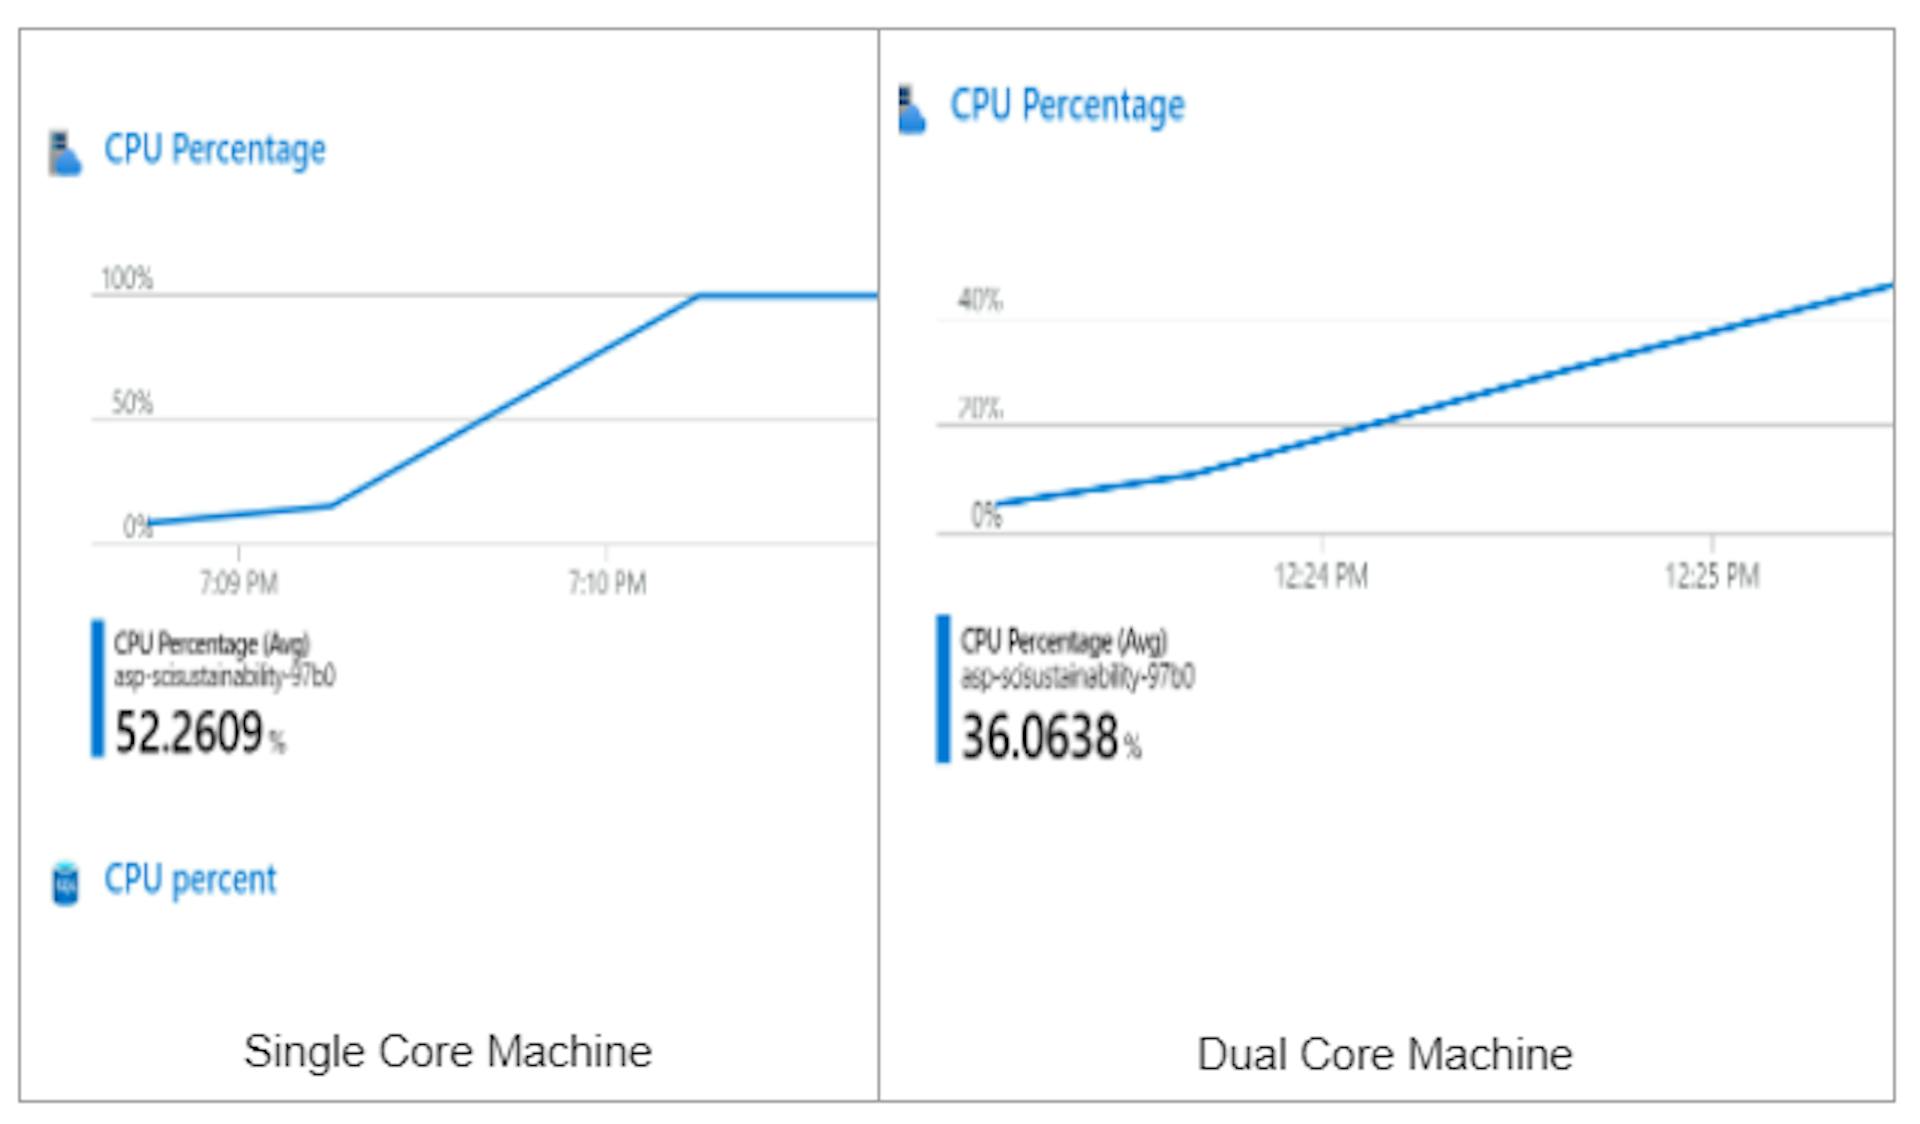 Graphs comparing Server Utilization with Single Core and Dual Core Machines